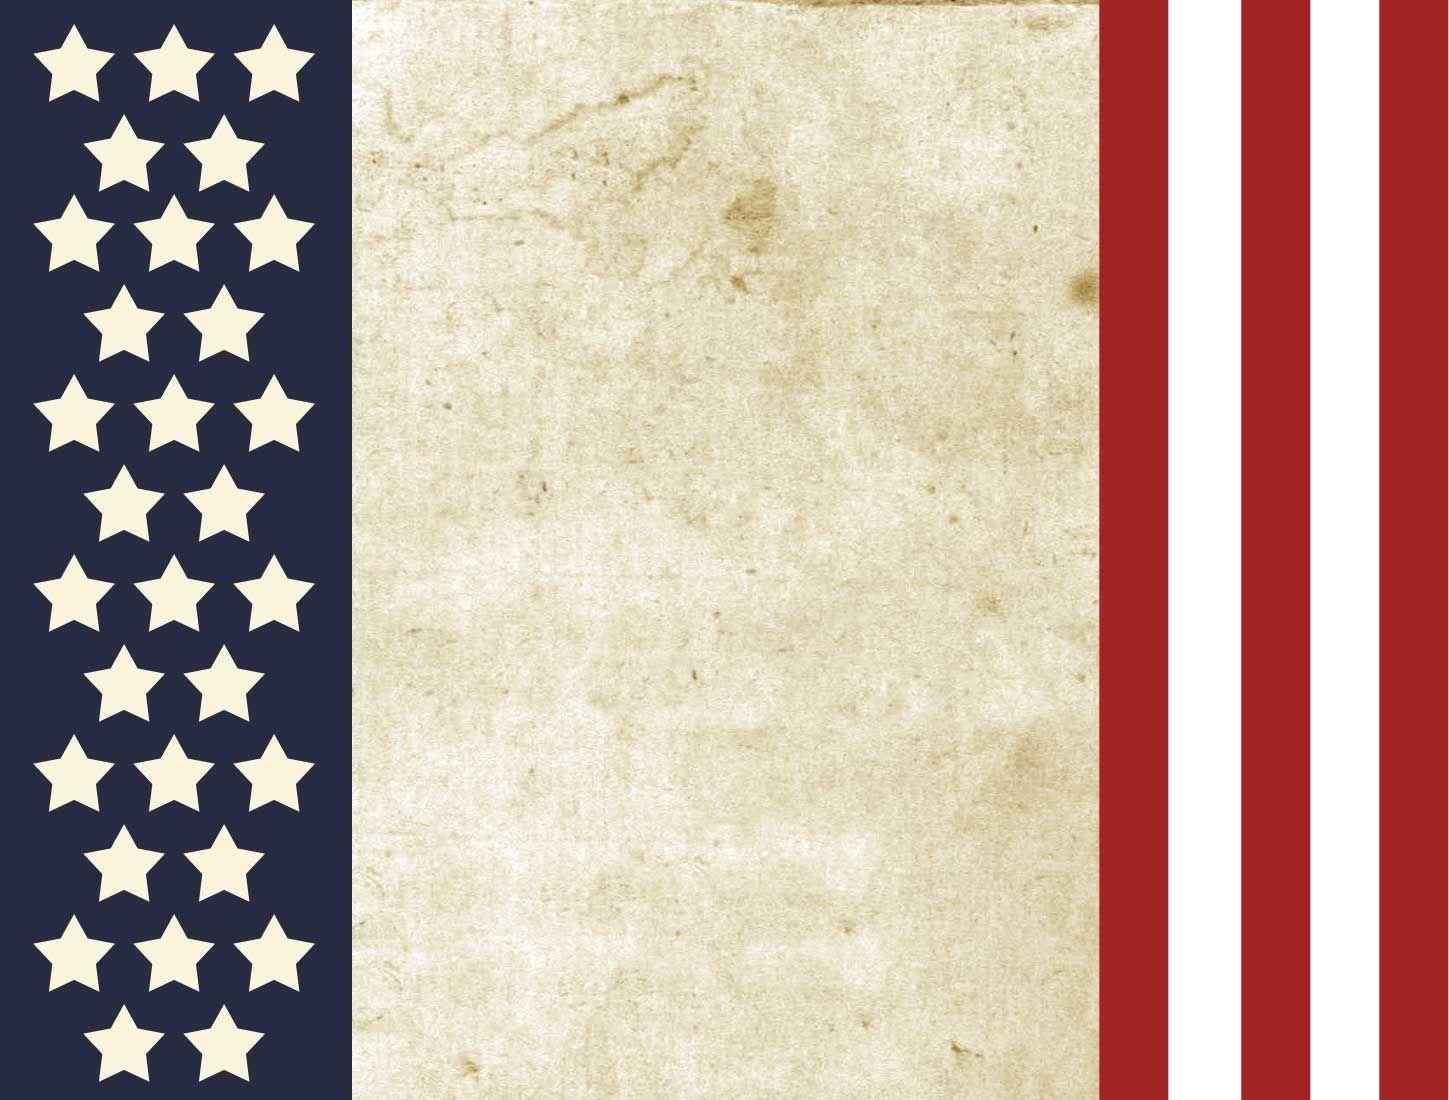 Free Patriotic Background. Just download the image above, Host it